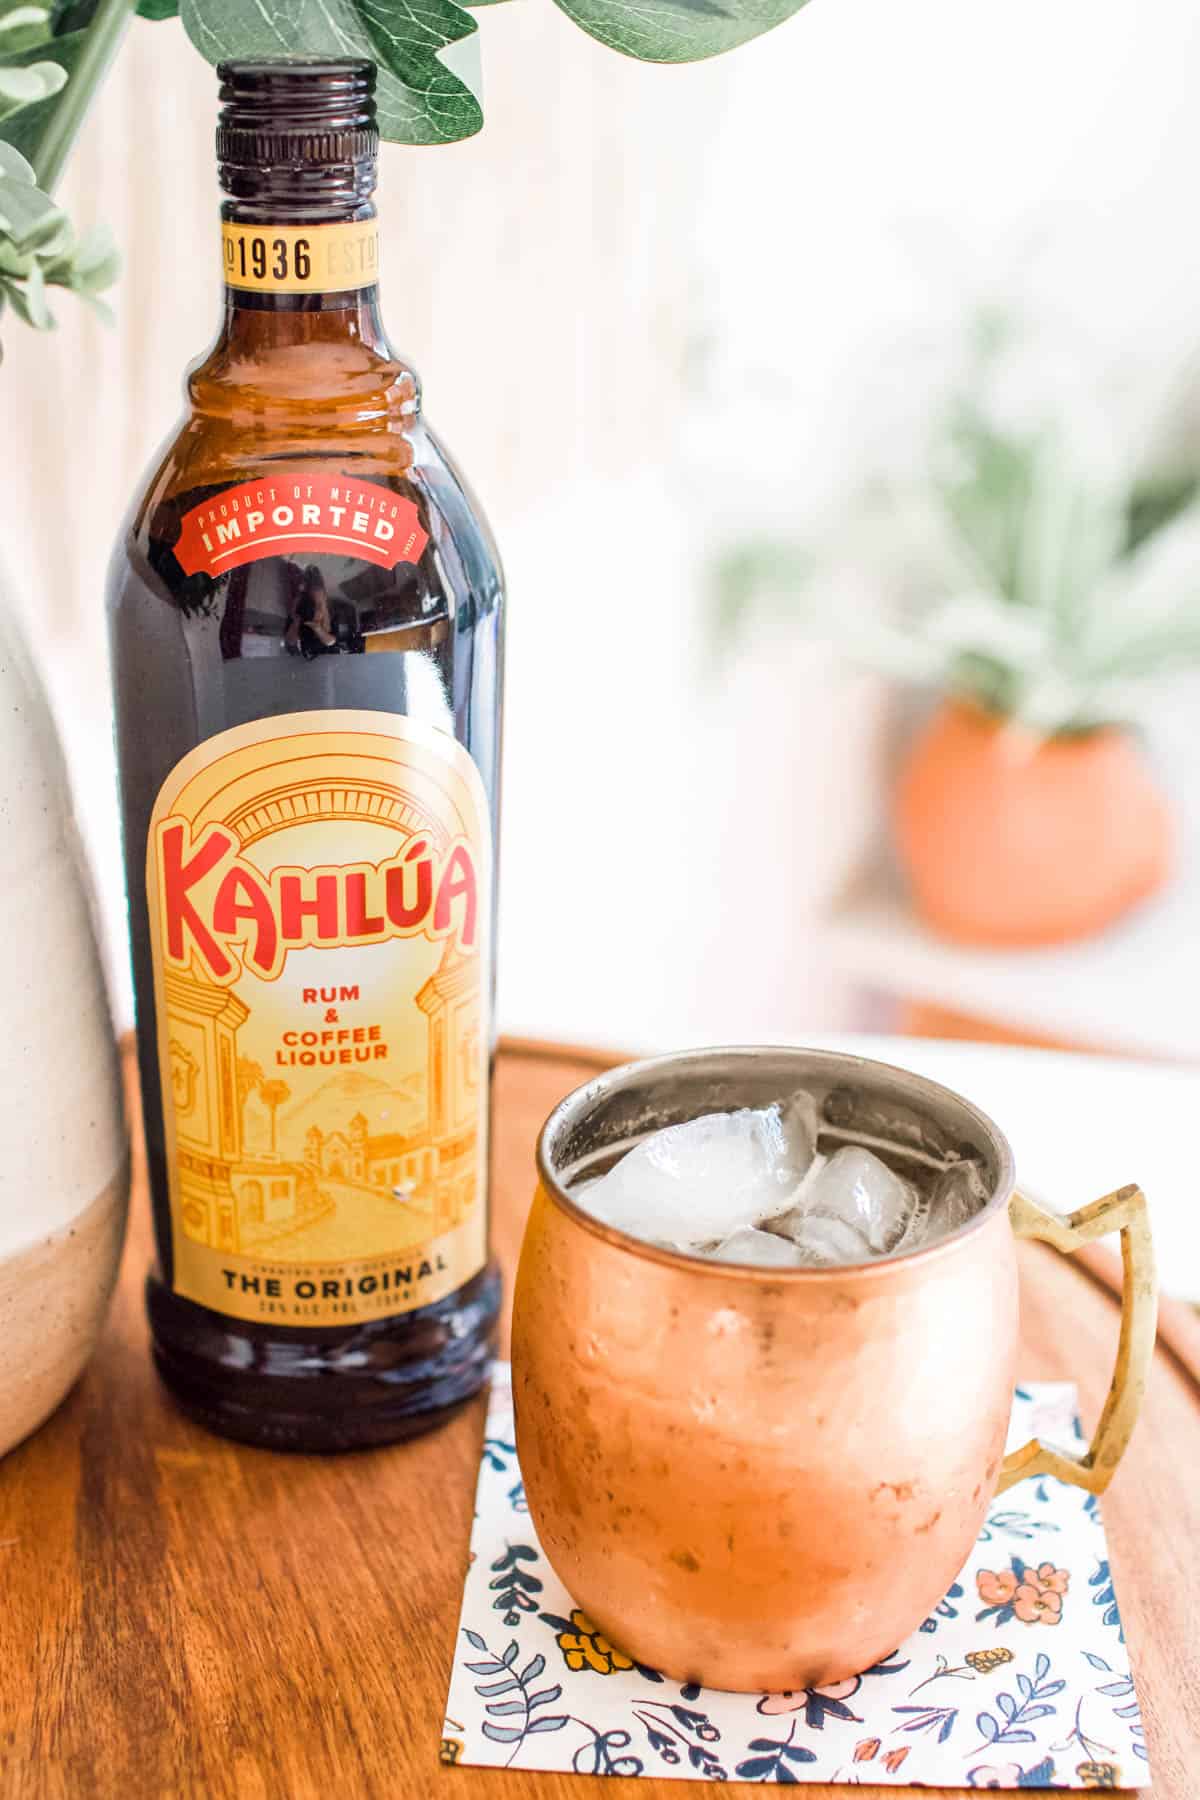 Moscow Mule in a mug on a table next to a bottle of Kahlua.